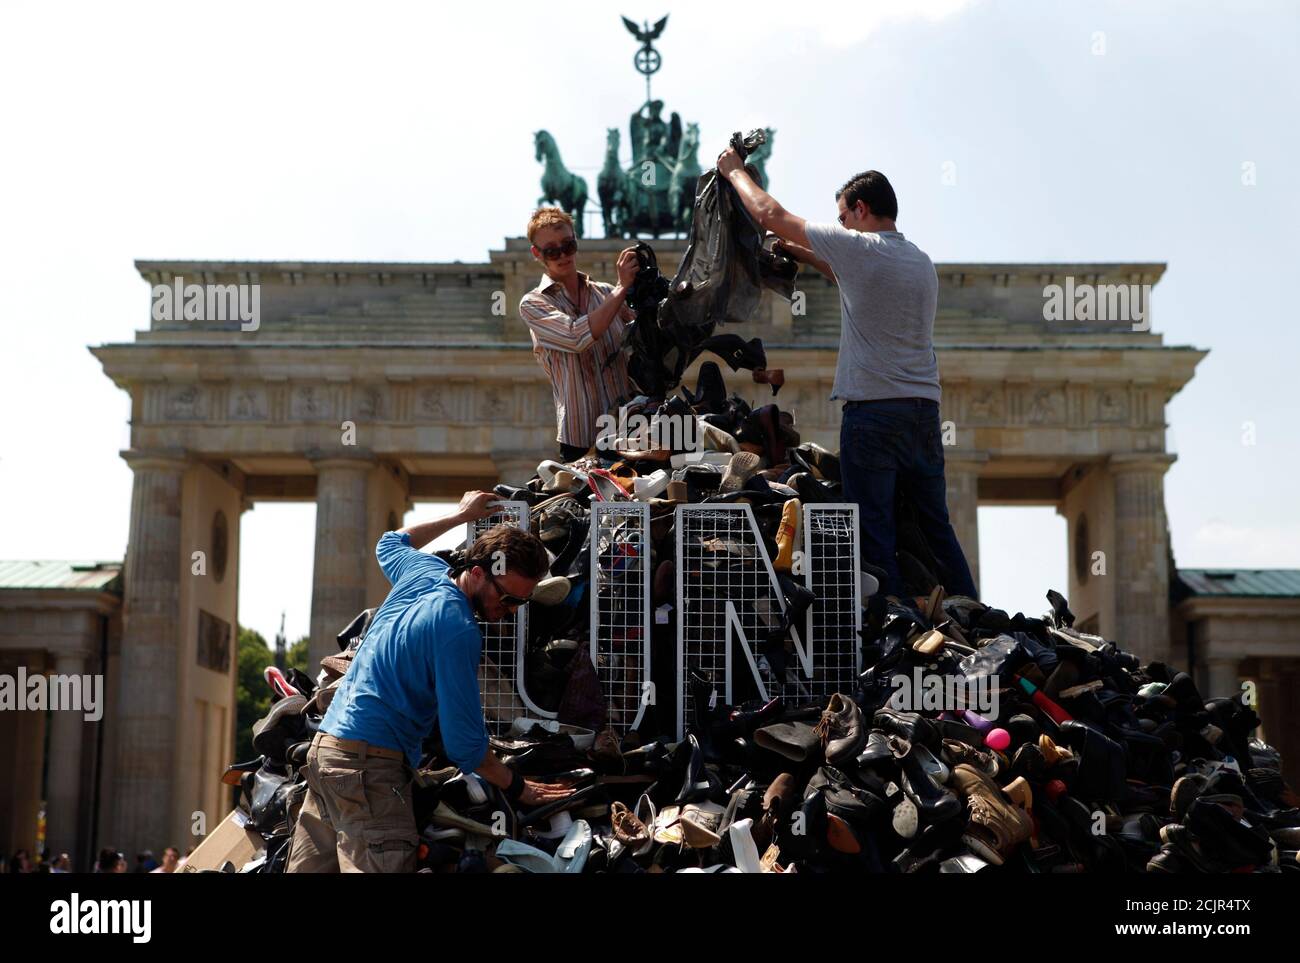 People pile up shoes to build the monument 'Pillar of Shame' in front of the Brandenburg Gate in Berlin, July 10, 2010, commemorating the 1995 mass murder of Muslim men and boys in the town of Srebrenica. The Society for Threatened Peoples has collected some16,744 shoes from Bosnia, Austria, Switzerland and Germany to build the monument is to draw attention to the failure of the United Nation (UN) to prevent the killing of 8372 refugees who died during the Bosnian War in an area that was declared a UN safe zone.  REUTERS/Thomas Peter (GERMANY - Tags: POLITICS IMAGES OF THE DAY) Stock Photo